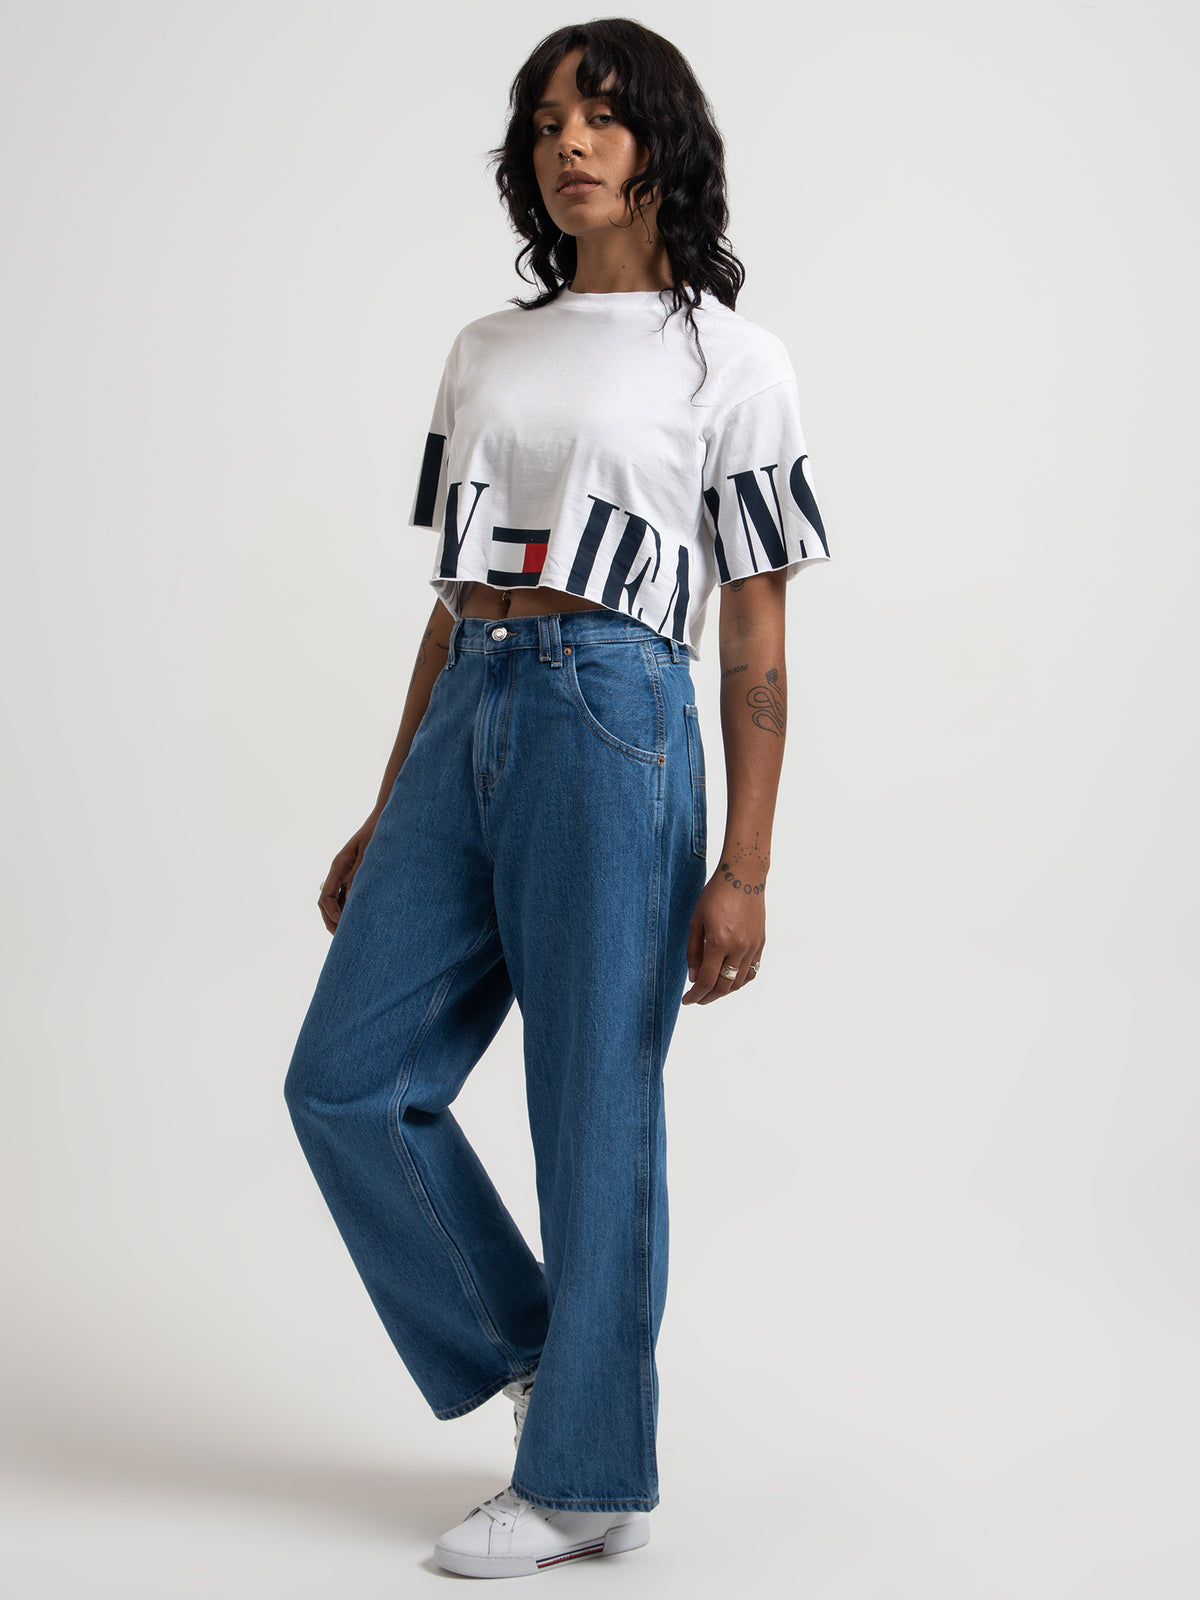 Oversized Crop Archive T-Shirt in White